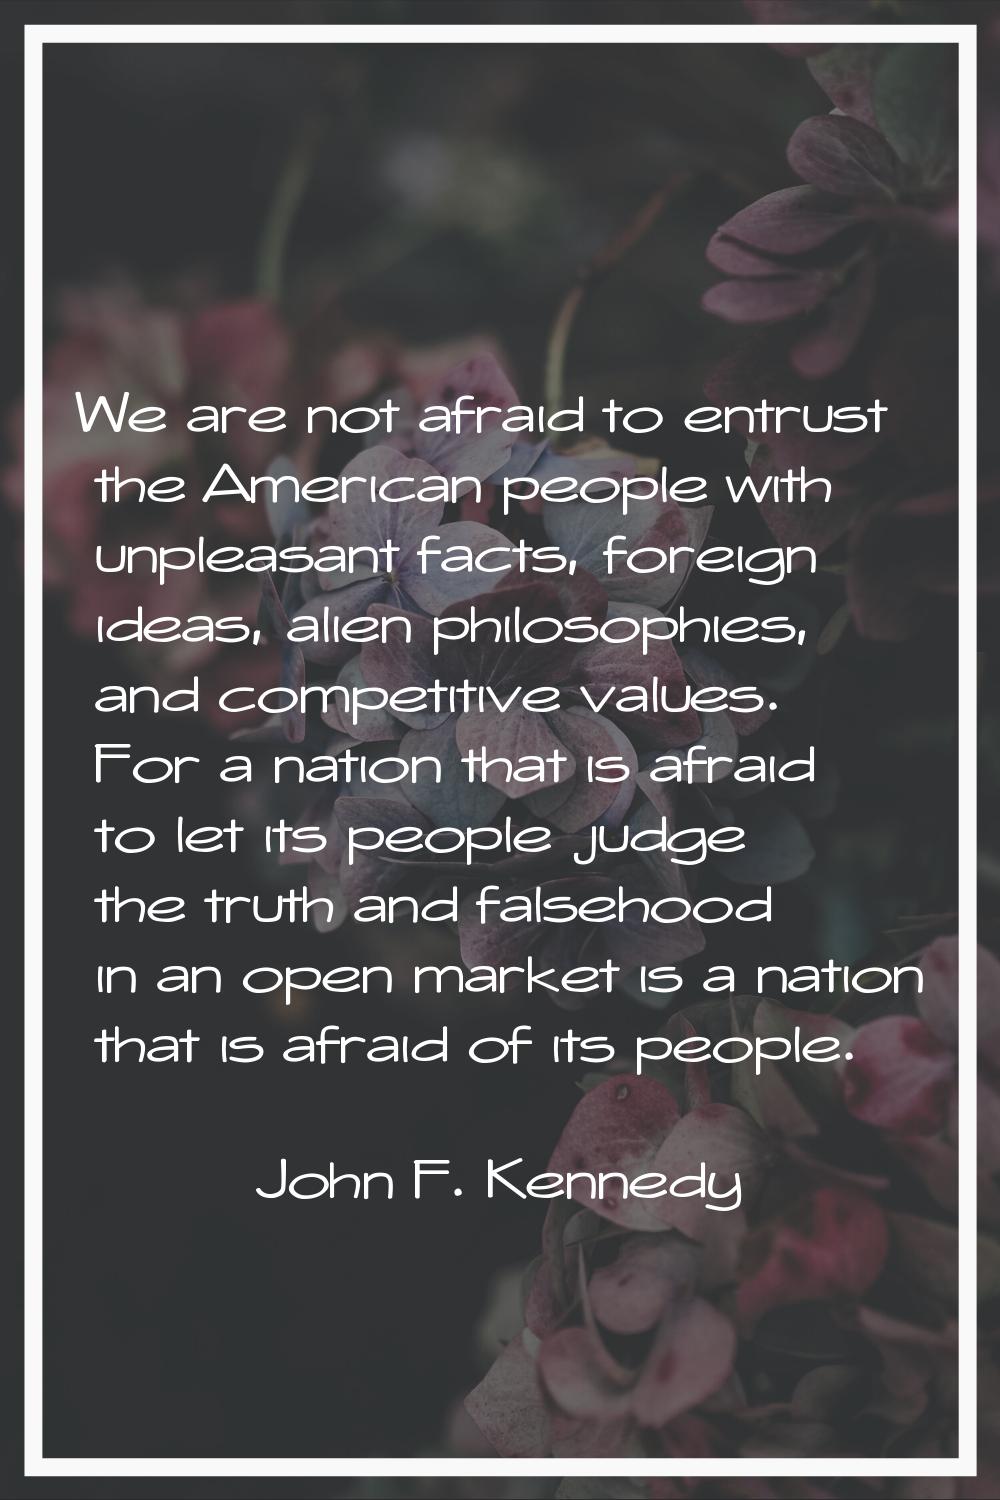 We are not afraid to entrust the American people with unpleasant facts, foreign ideas, alien philos